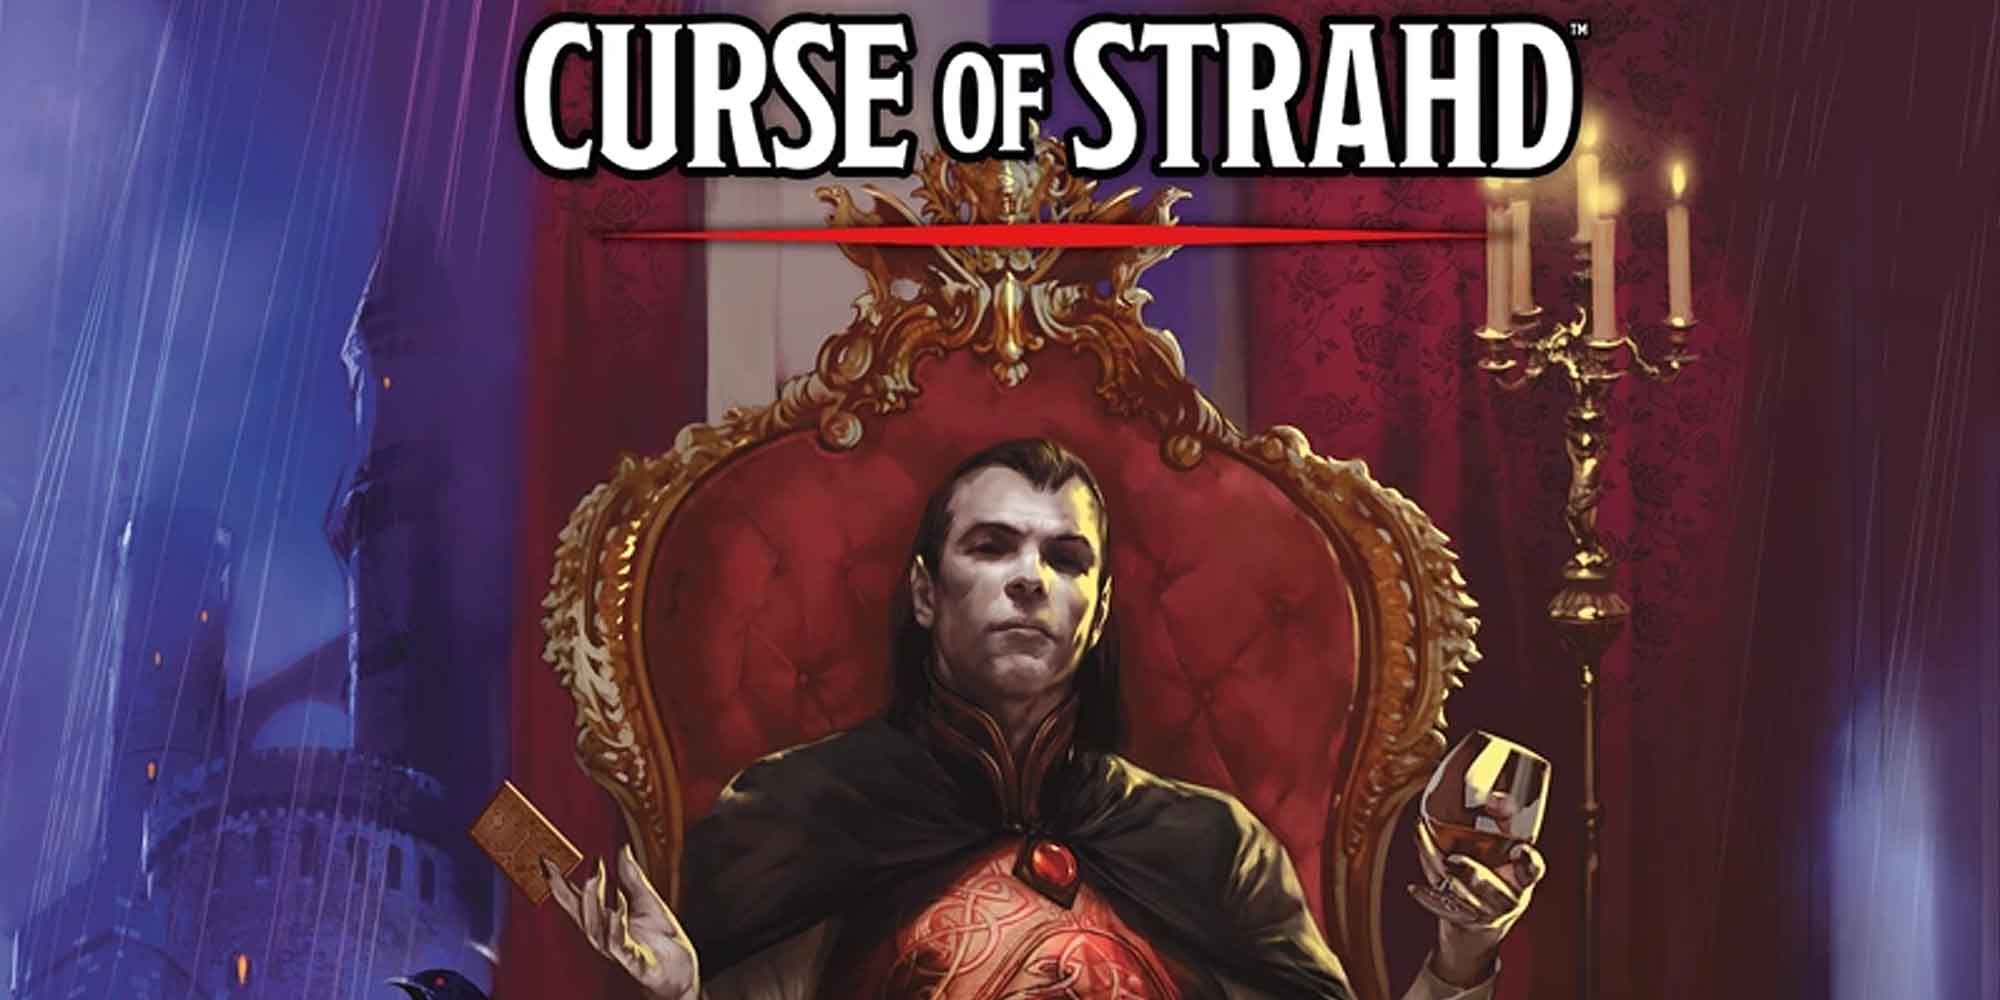 The cover to the Curse of Strahd Dungeons and dragons module